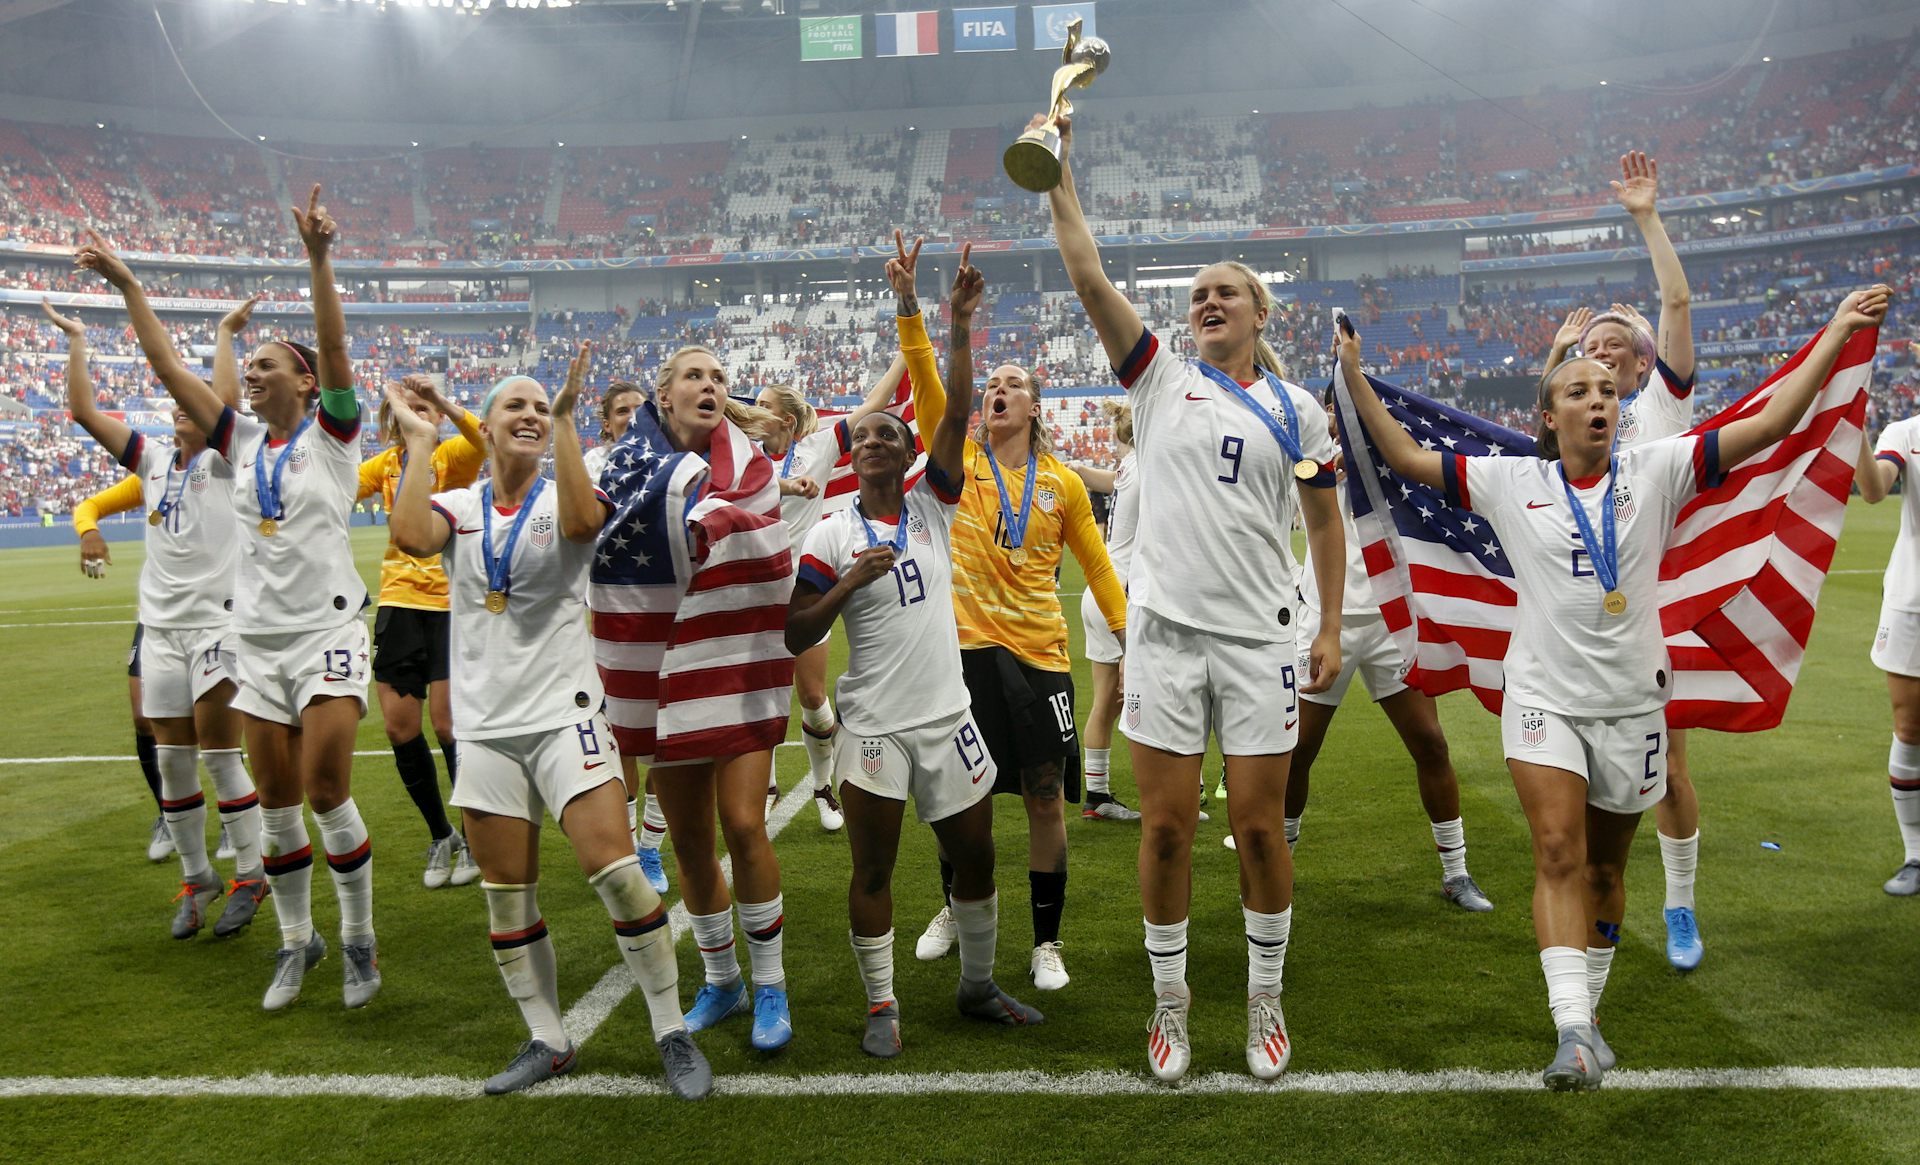 Womens World Cup will highlight how far other countries have closed the gap with US